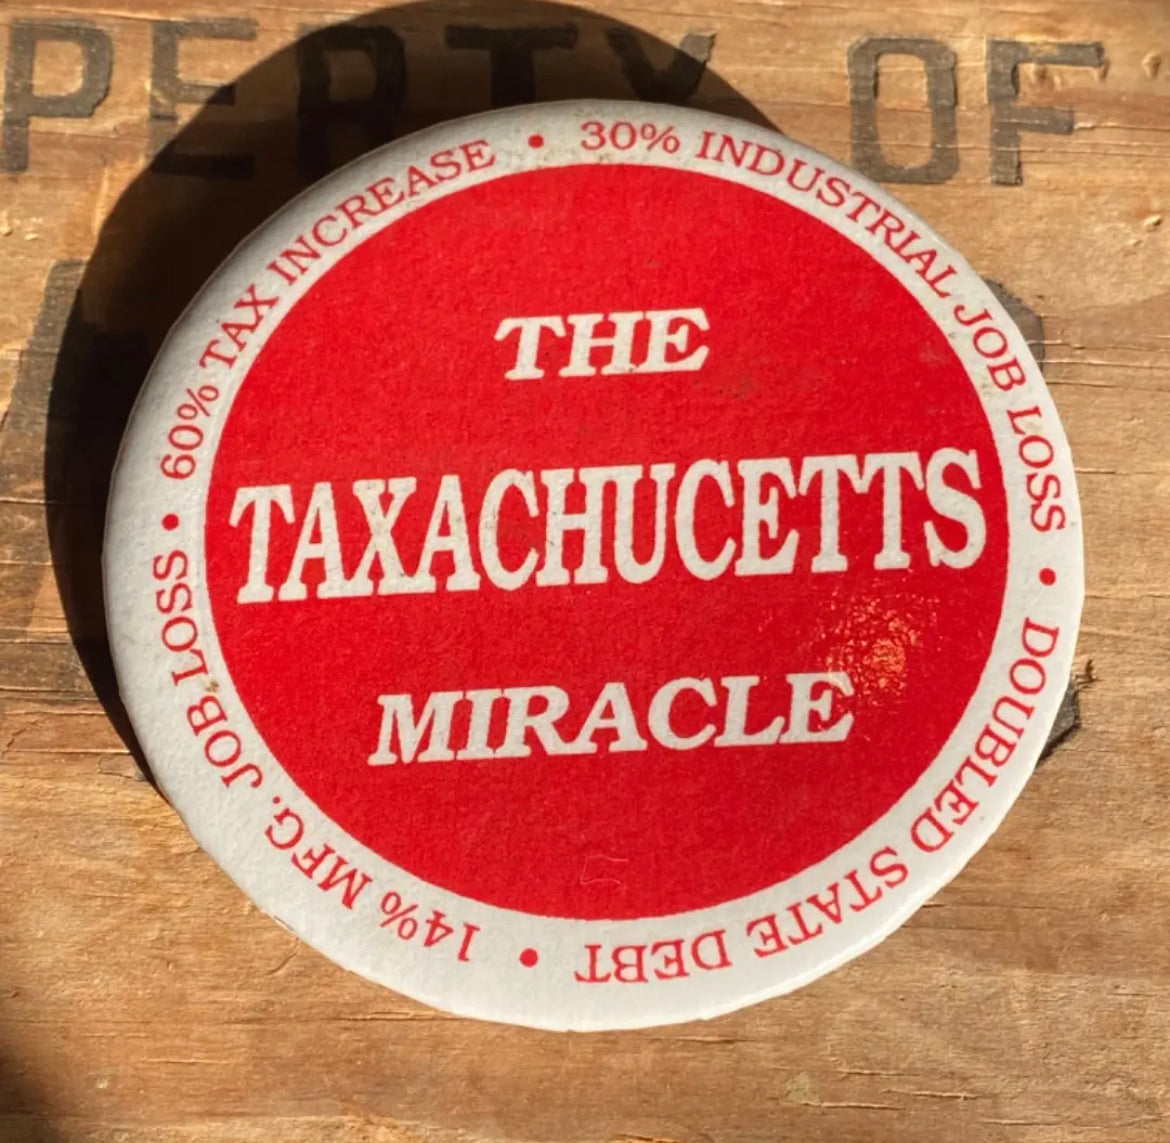 【USA vintage】缶バッジ　The Taxachucetts Miracle